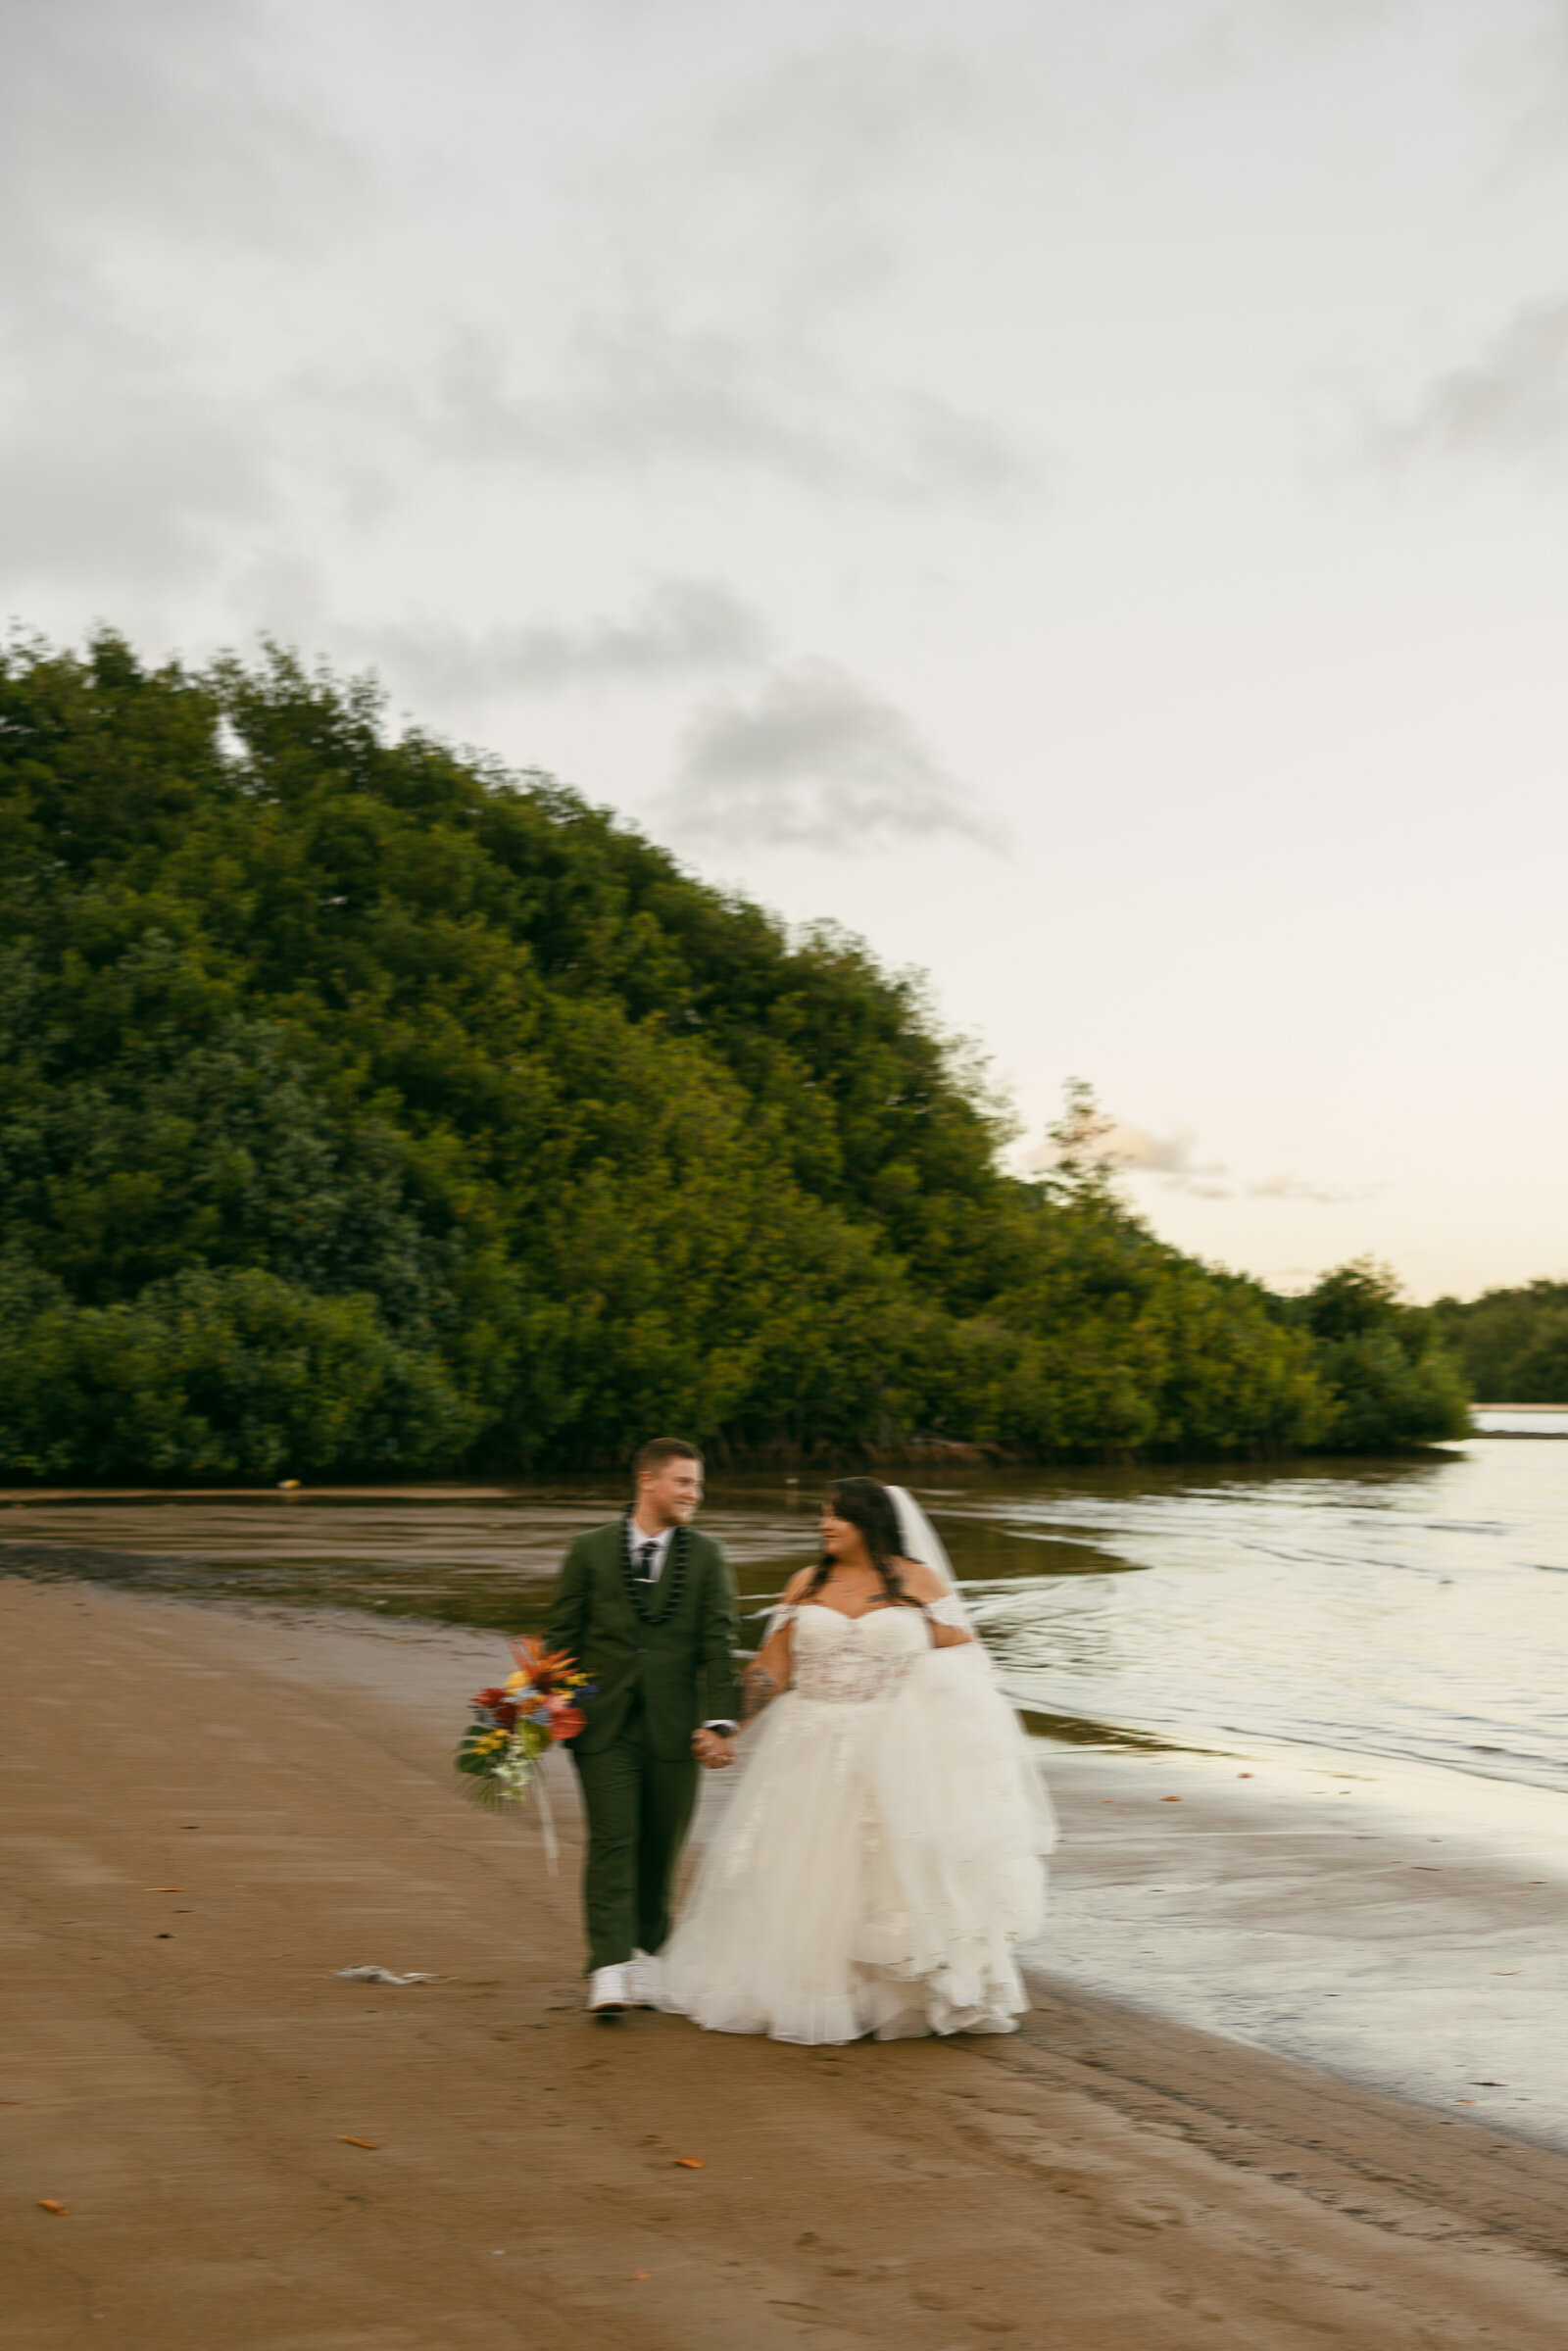 A bride and groom holding hands and walking along the water's edge.